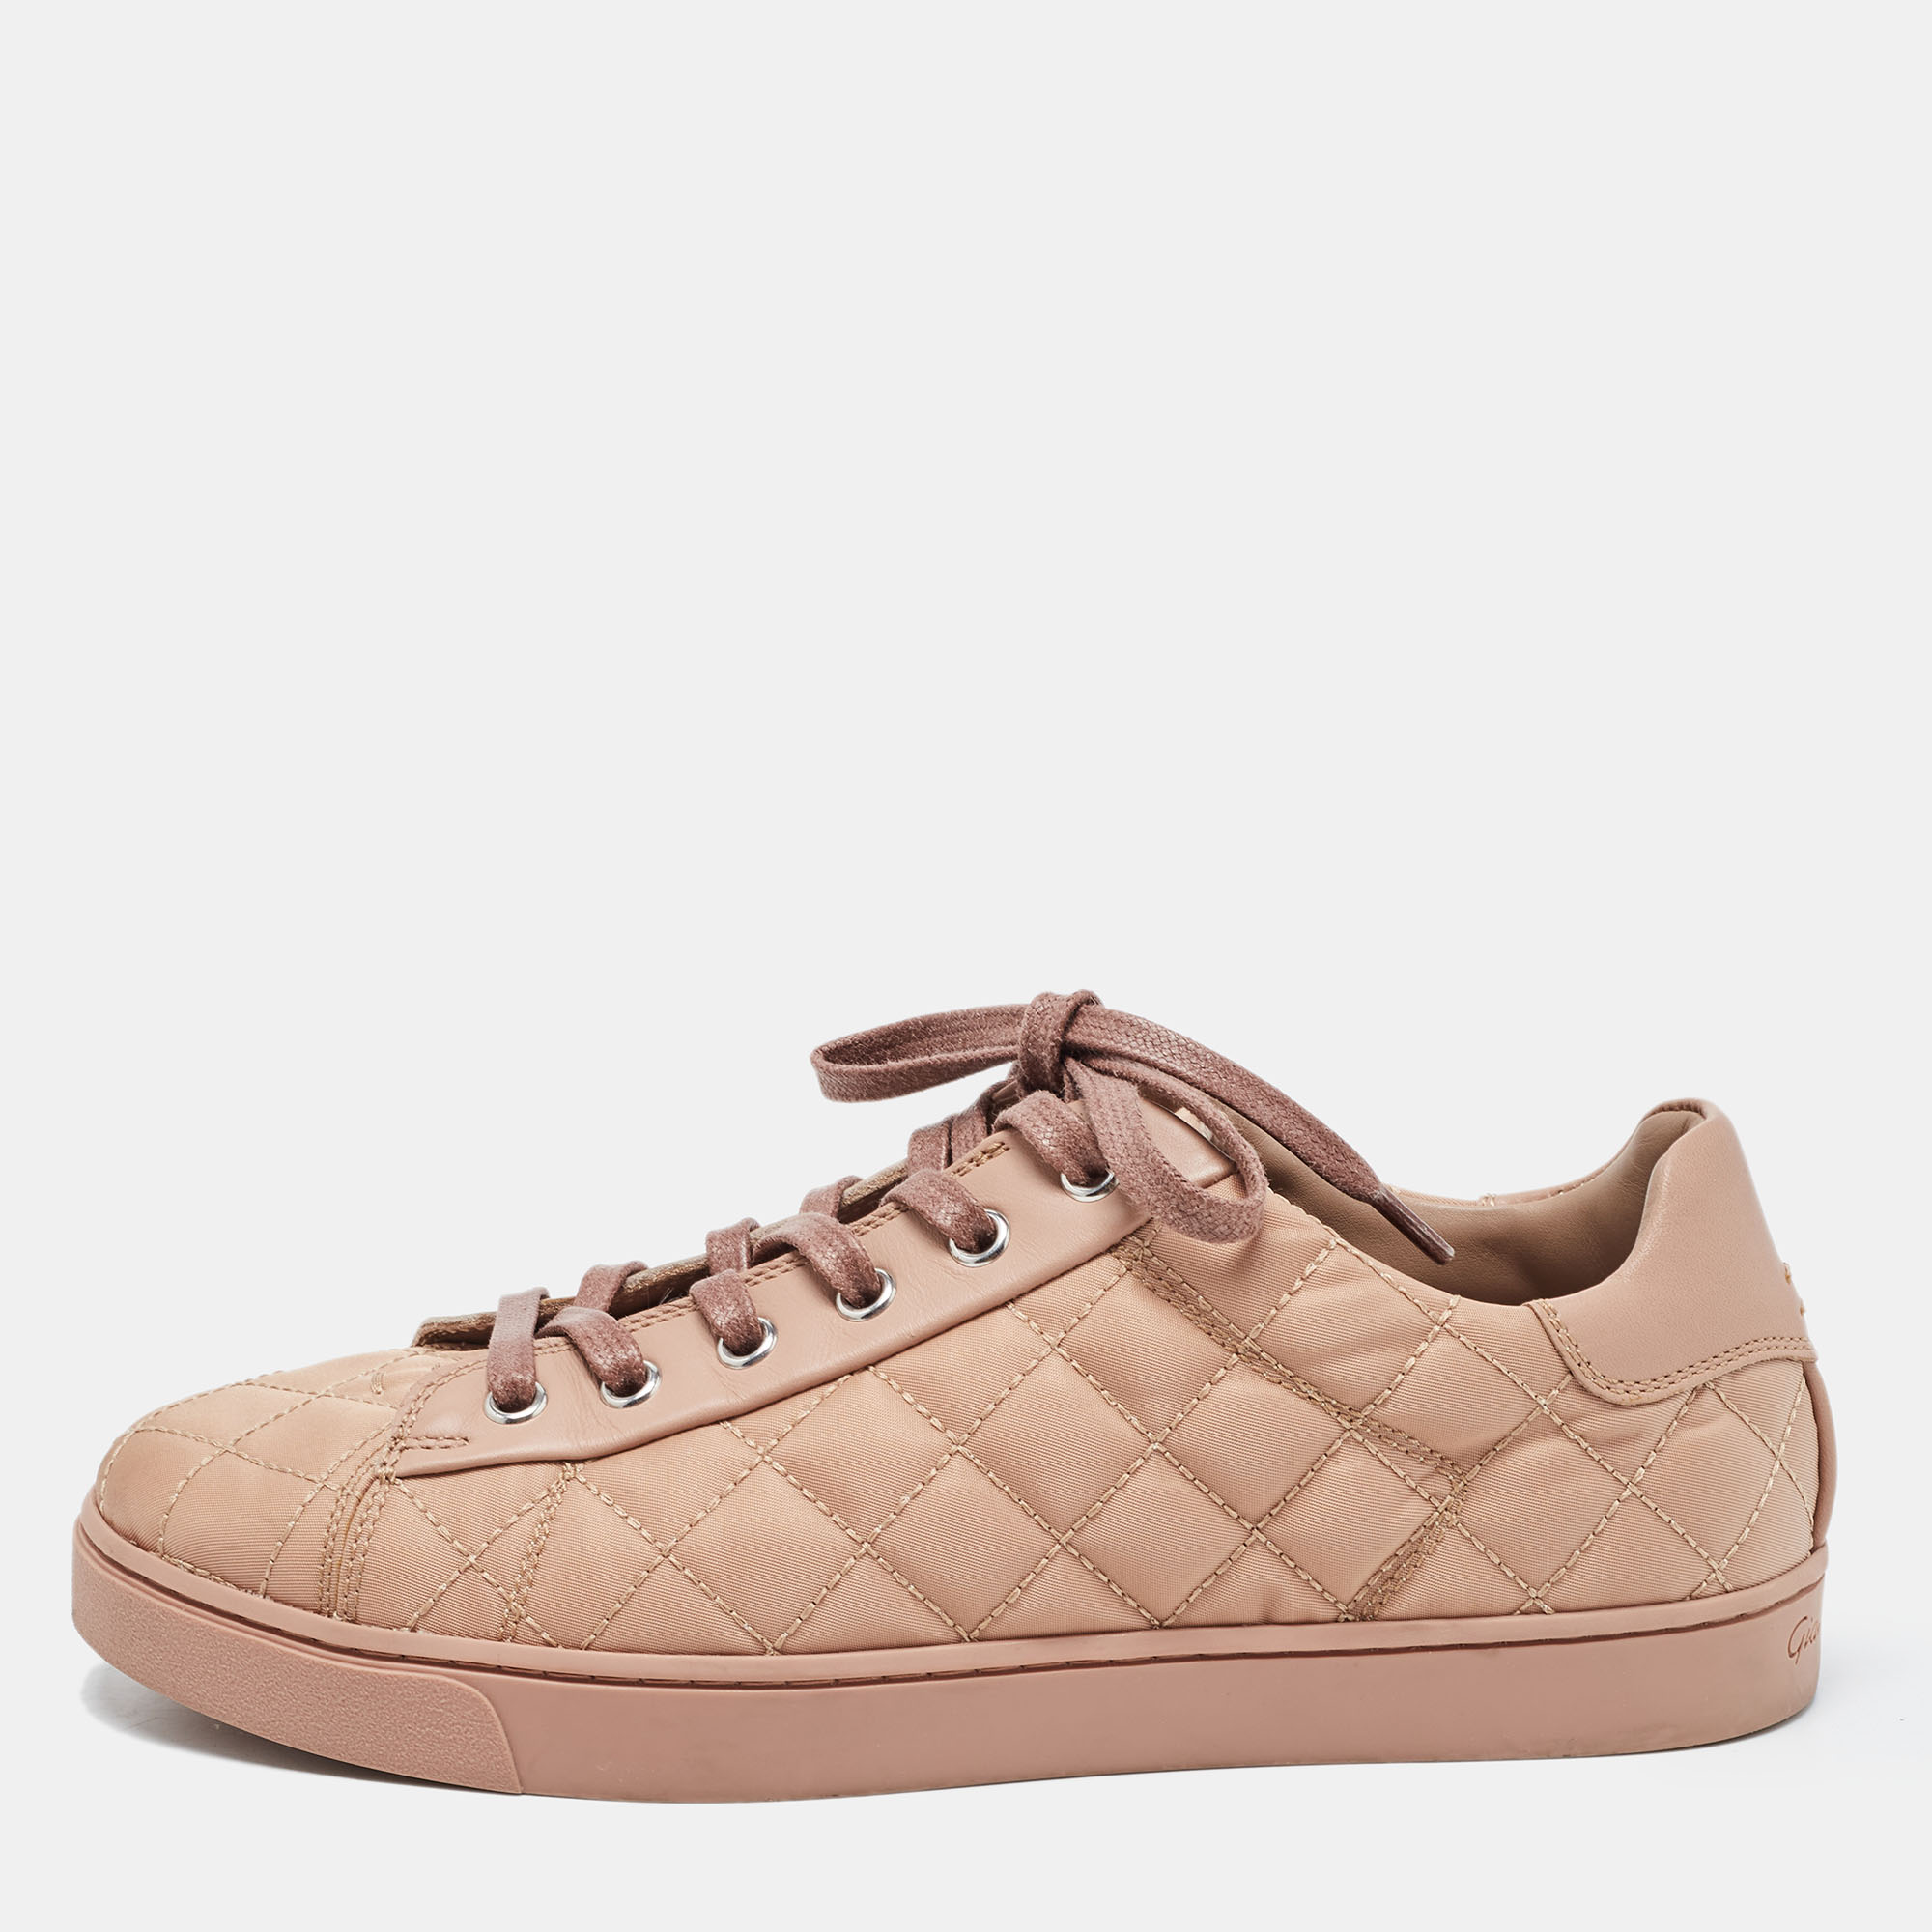 Pre-owned Gianvito Rossi Dusty Pink Quilted Leather Loft Low Top Sneakers Size 37